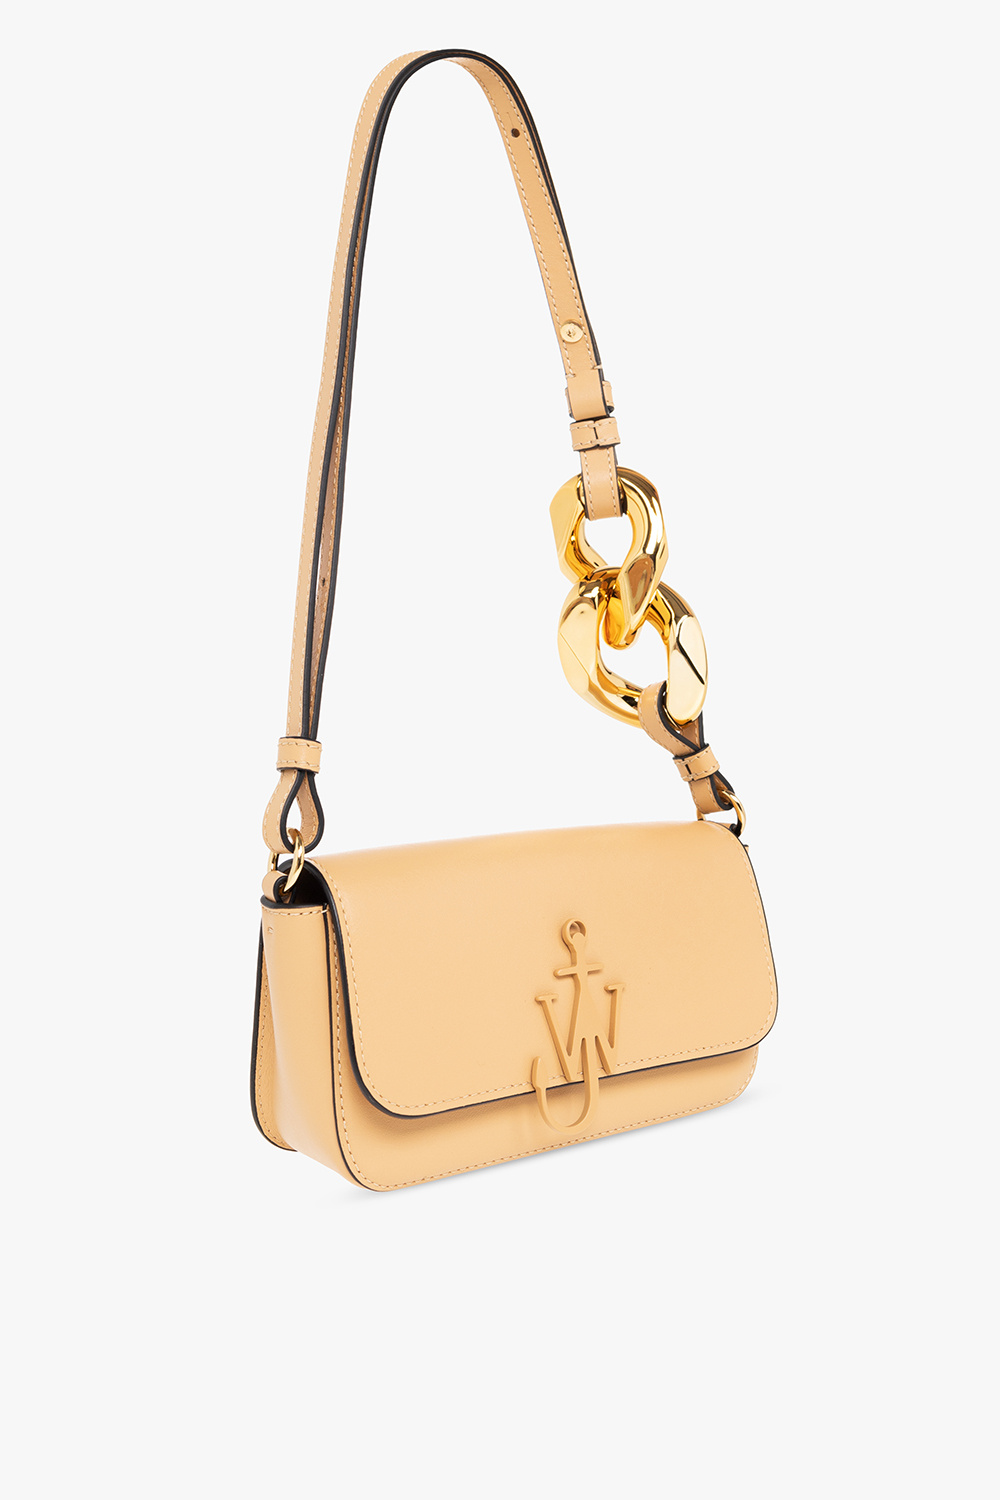 JW Anderson Chain Strap Small Cabas Bag in Light Beige – Hampden Clothing